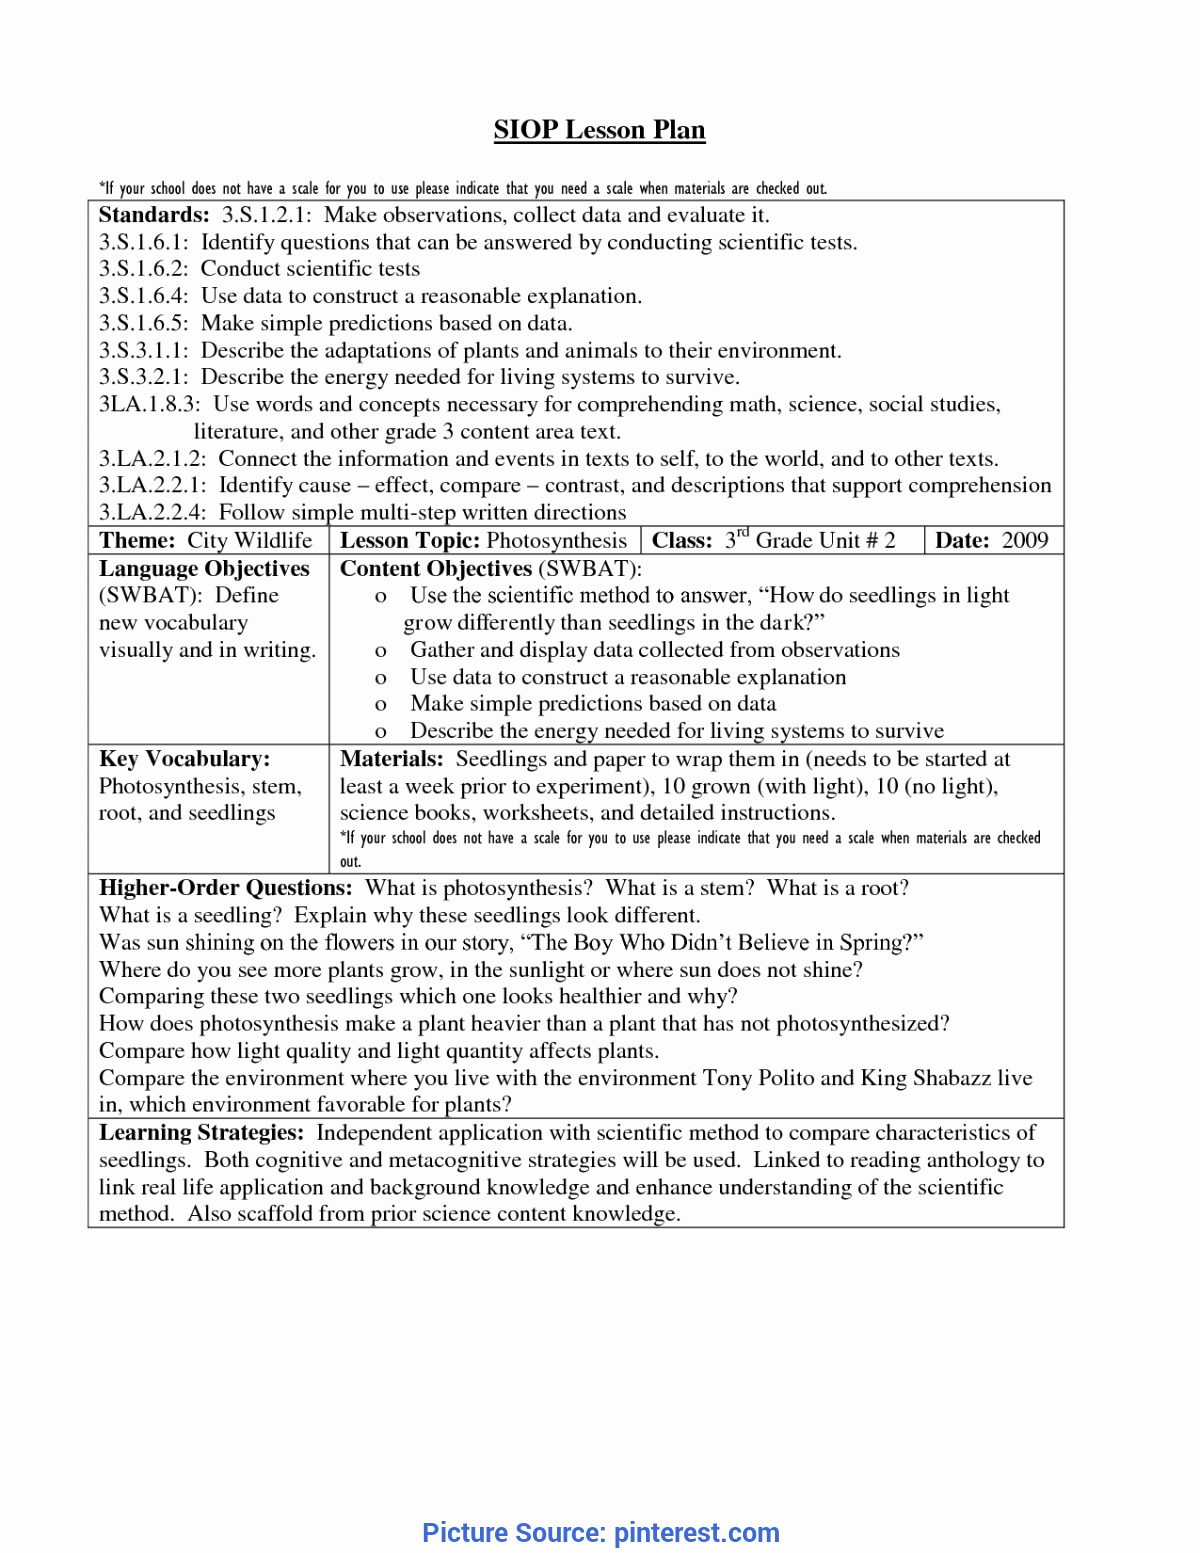 Siop Model Lesson Plan Template Fresh Best Infant Lesson Plans Weather Preschool Curriculum themes